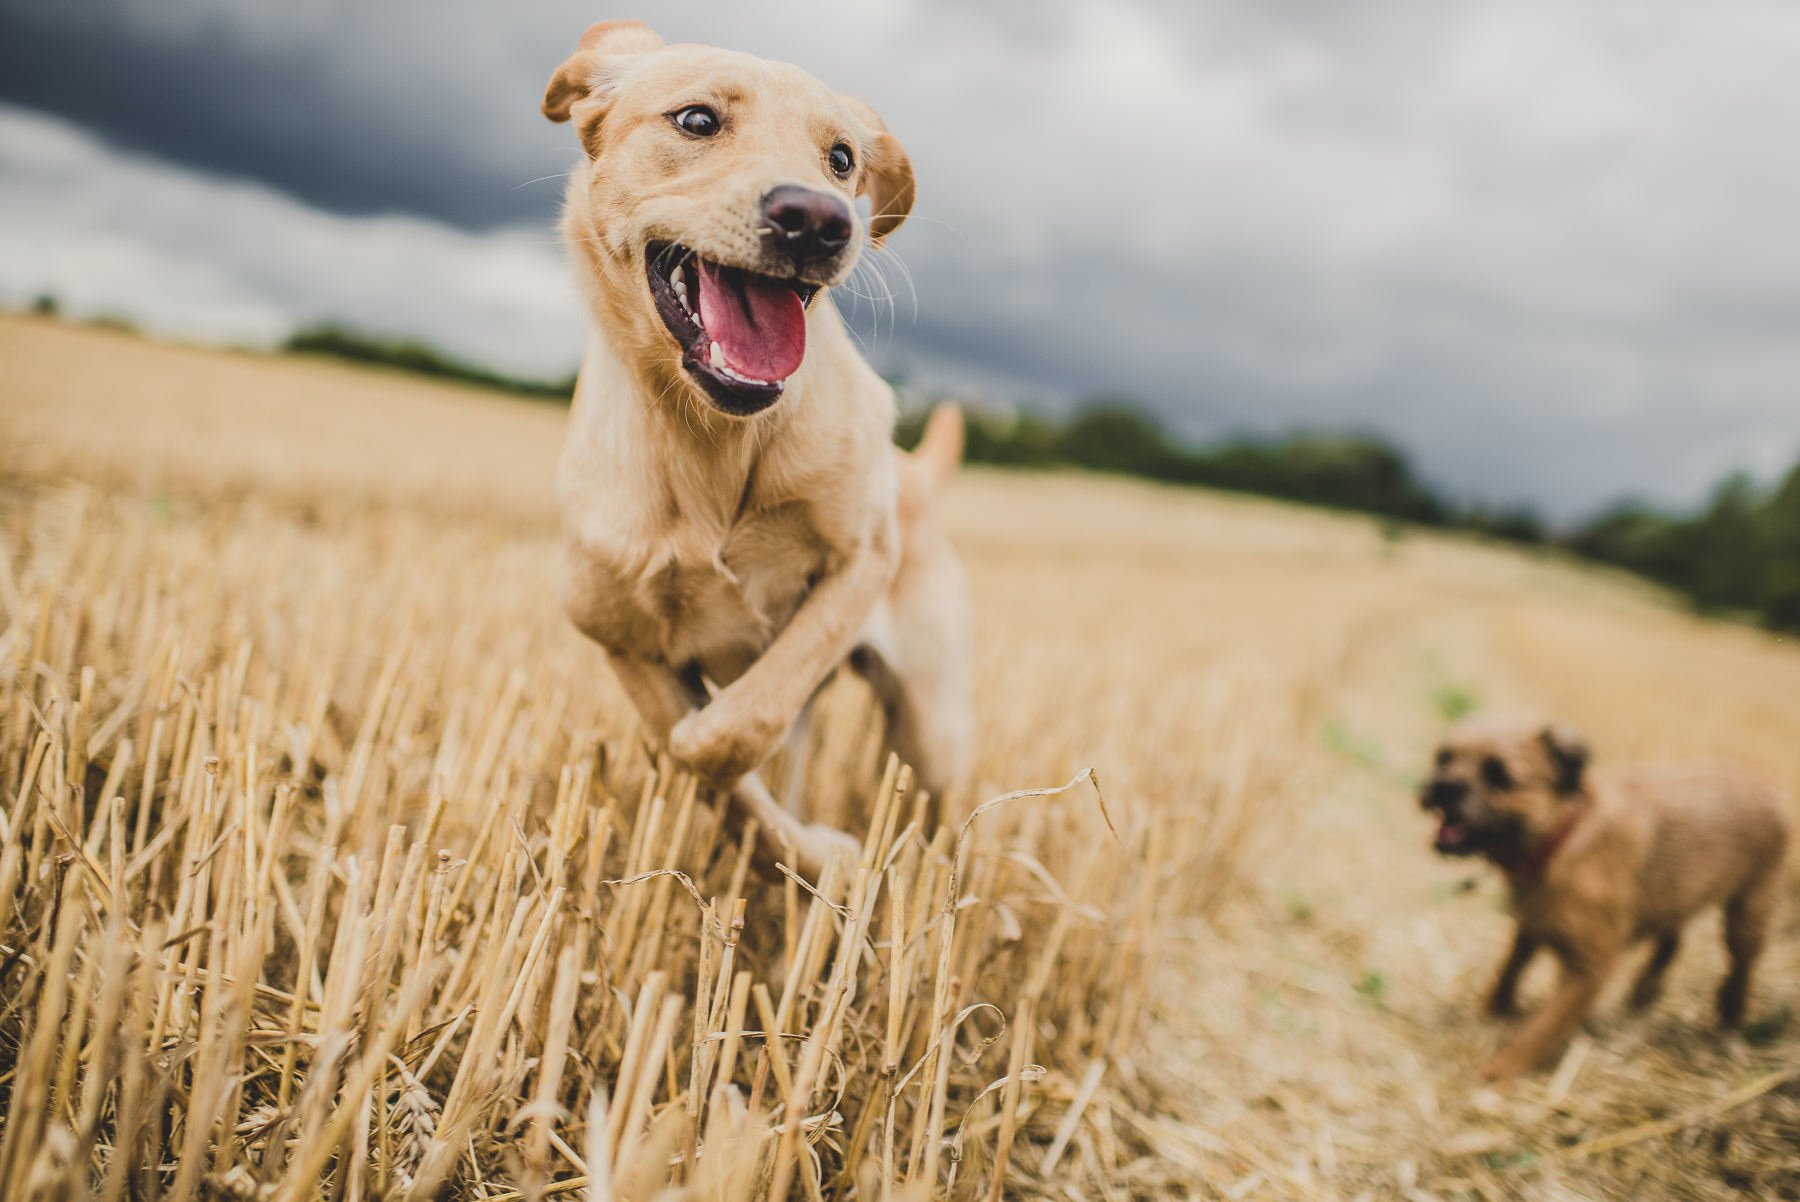 Yellow Labrador jumping away from border terrier in a wheat field